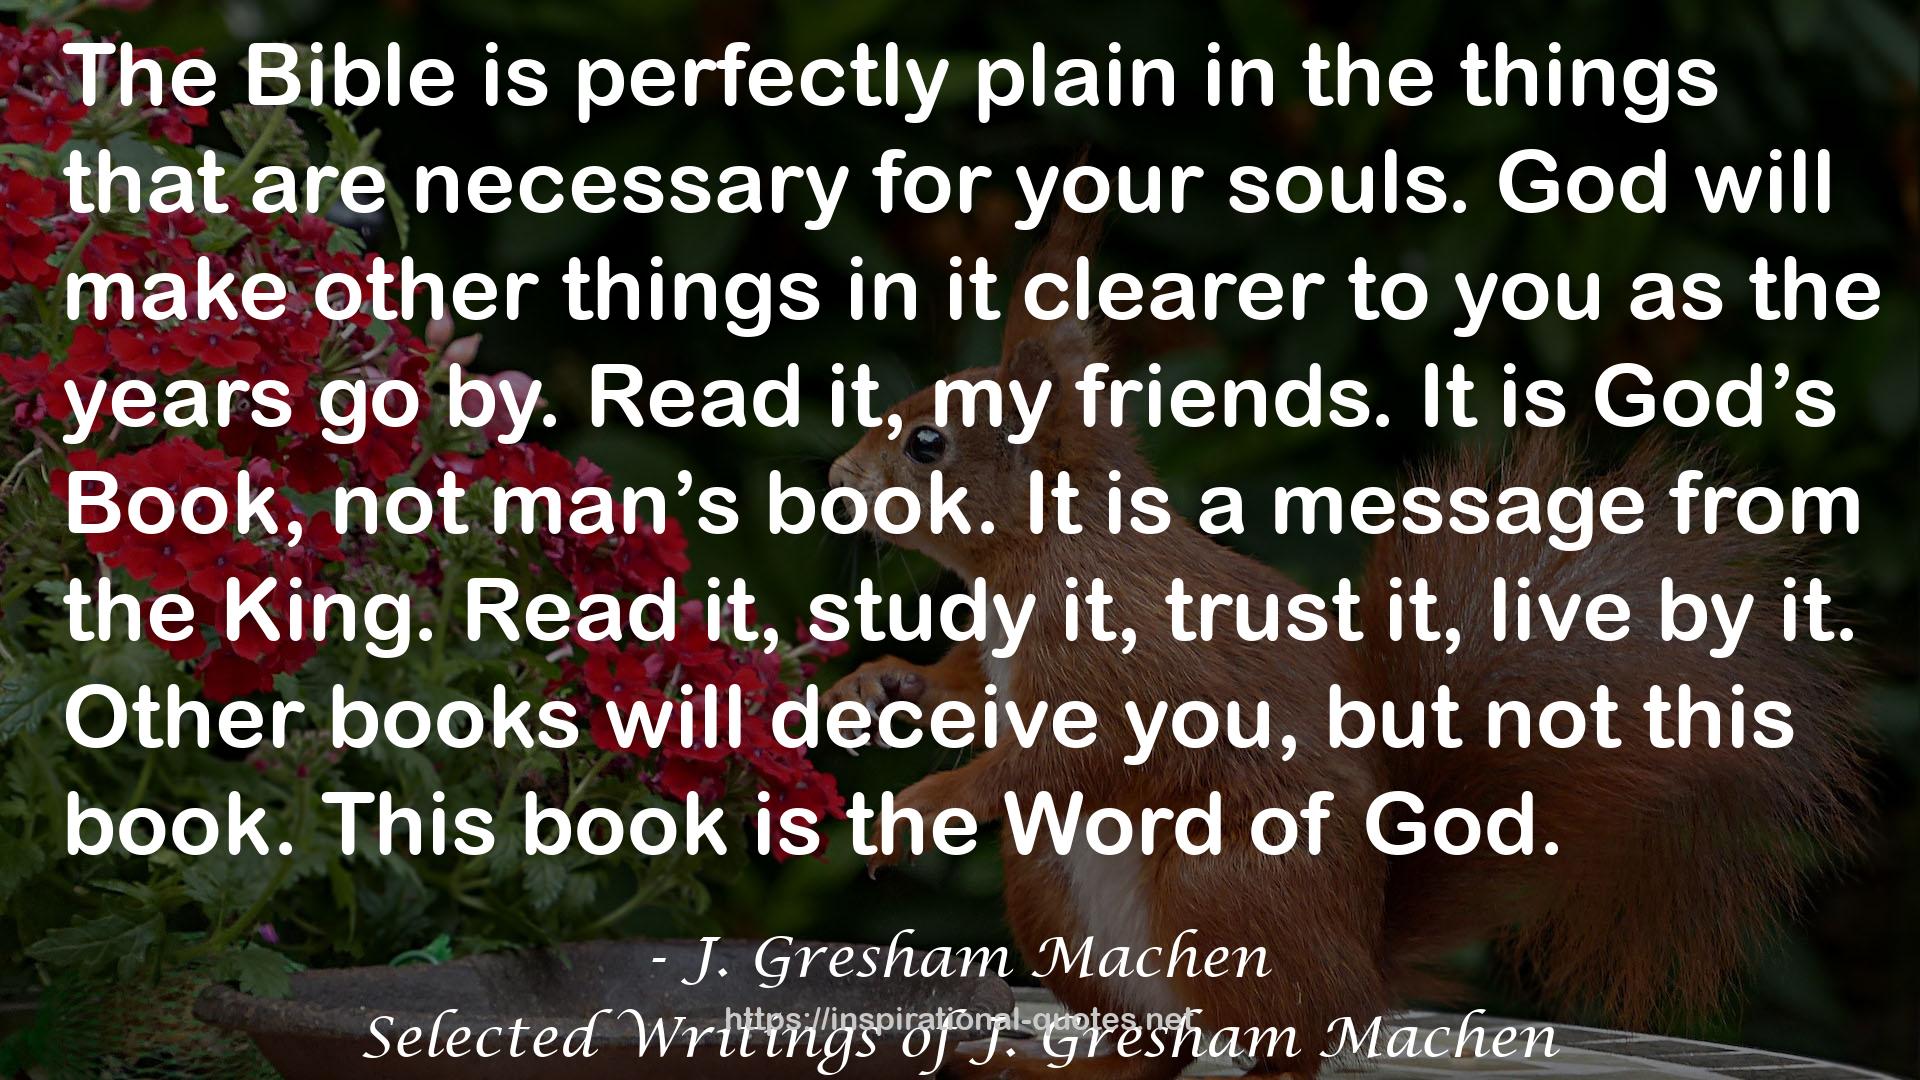 Selected Writings of J. Gresham Machen QUOTES